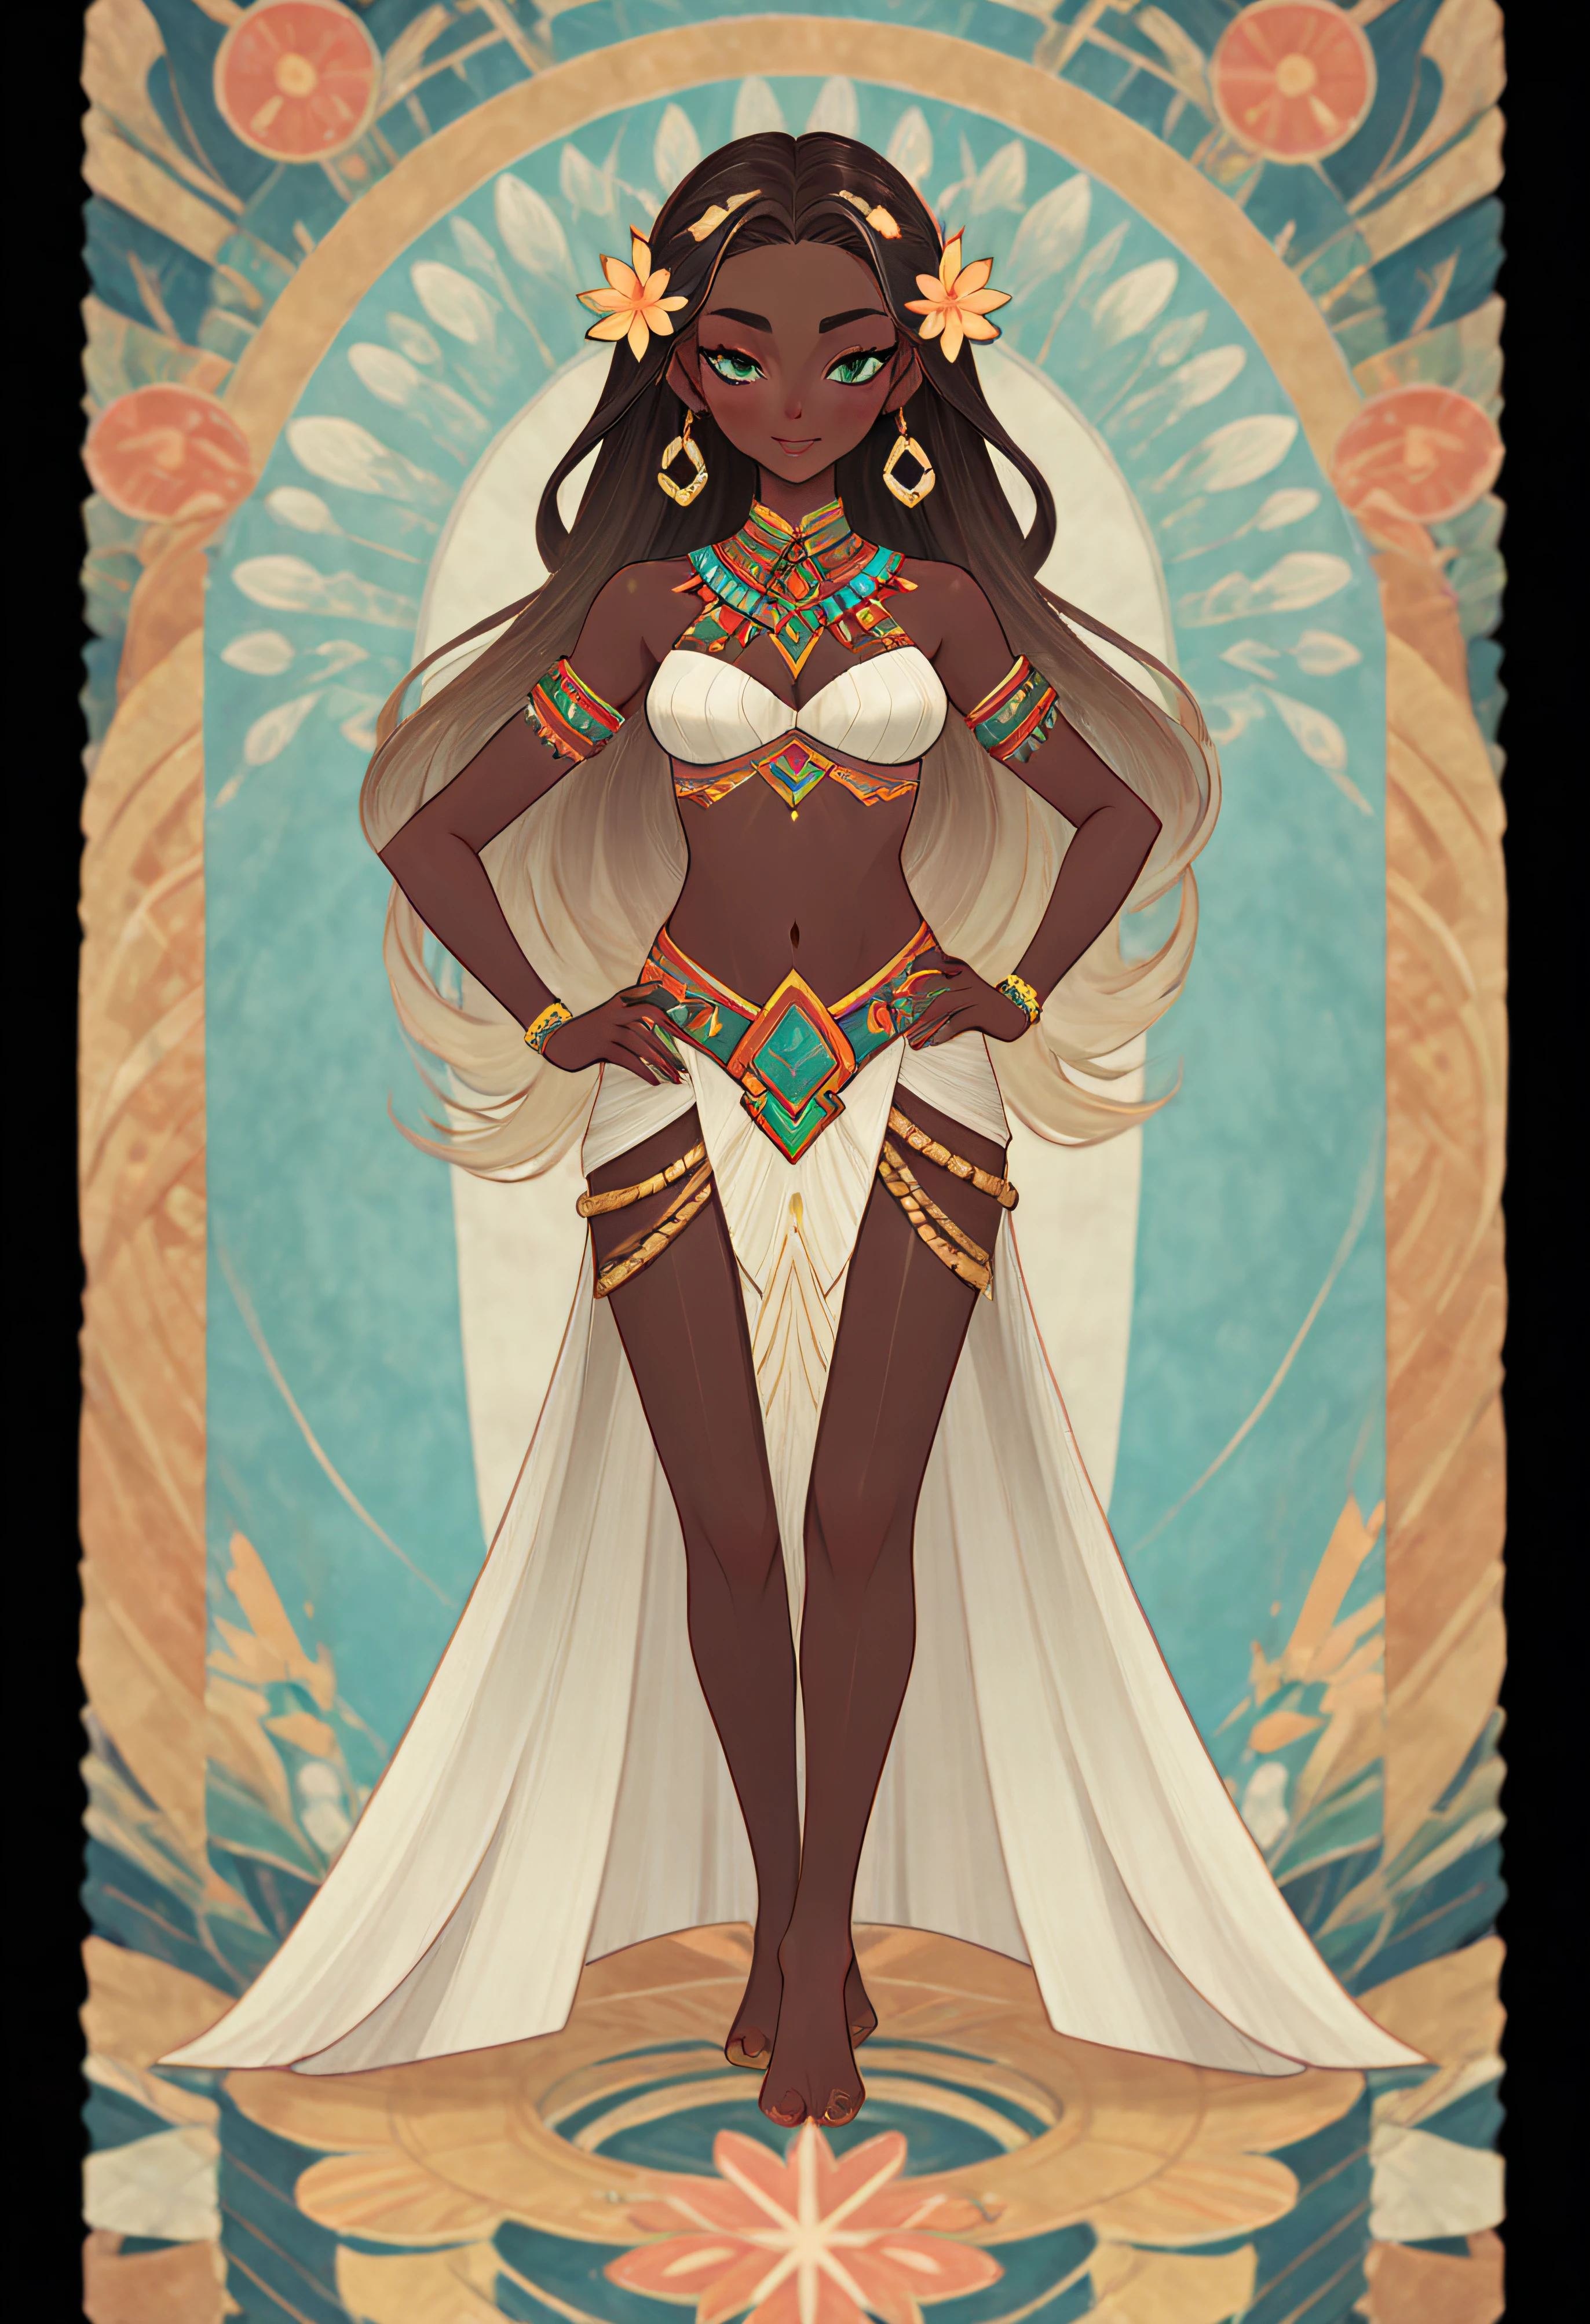 1 girl, Black skin, hula skirt, Full body standing painting, (((solo))), Clear facial features, Simple line design, ((tarot card background, symmetric beauty)), perfectly symmetrical, The art of symmetry, Standing drawings of characters, ((flatcolors)), tmasterpiece，top Quority，best qualtiy，Ultra-high resolution, ((Clear facial features，beautidful eyes，beauitful face, Exquisite facial features))